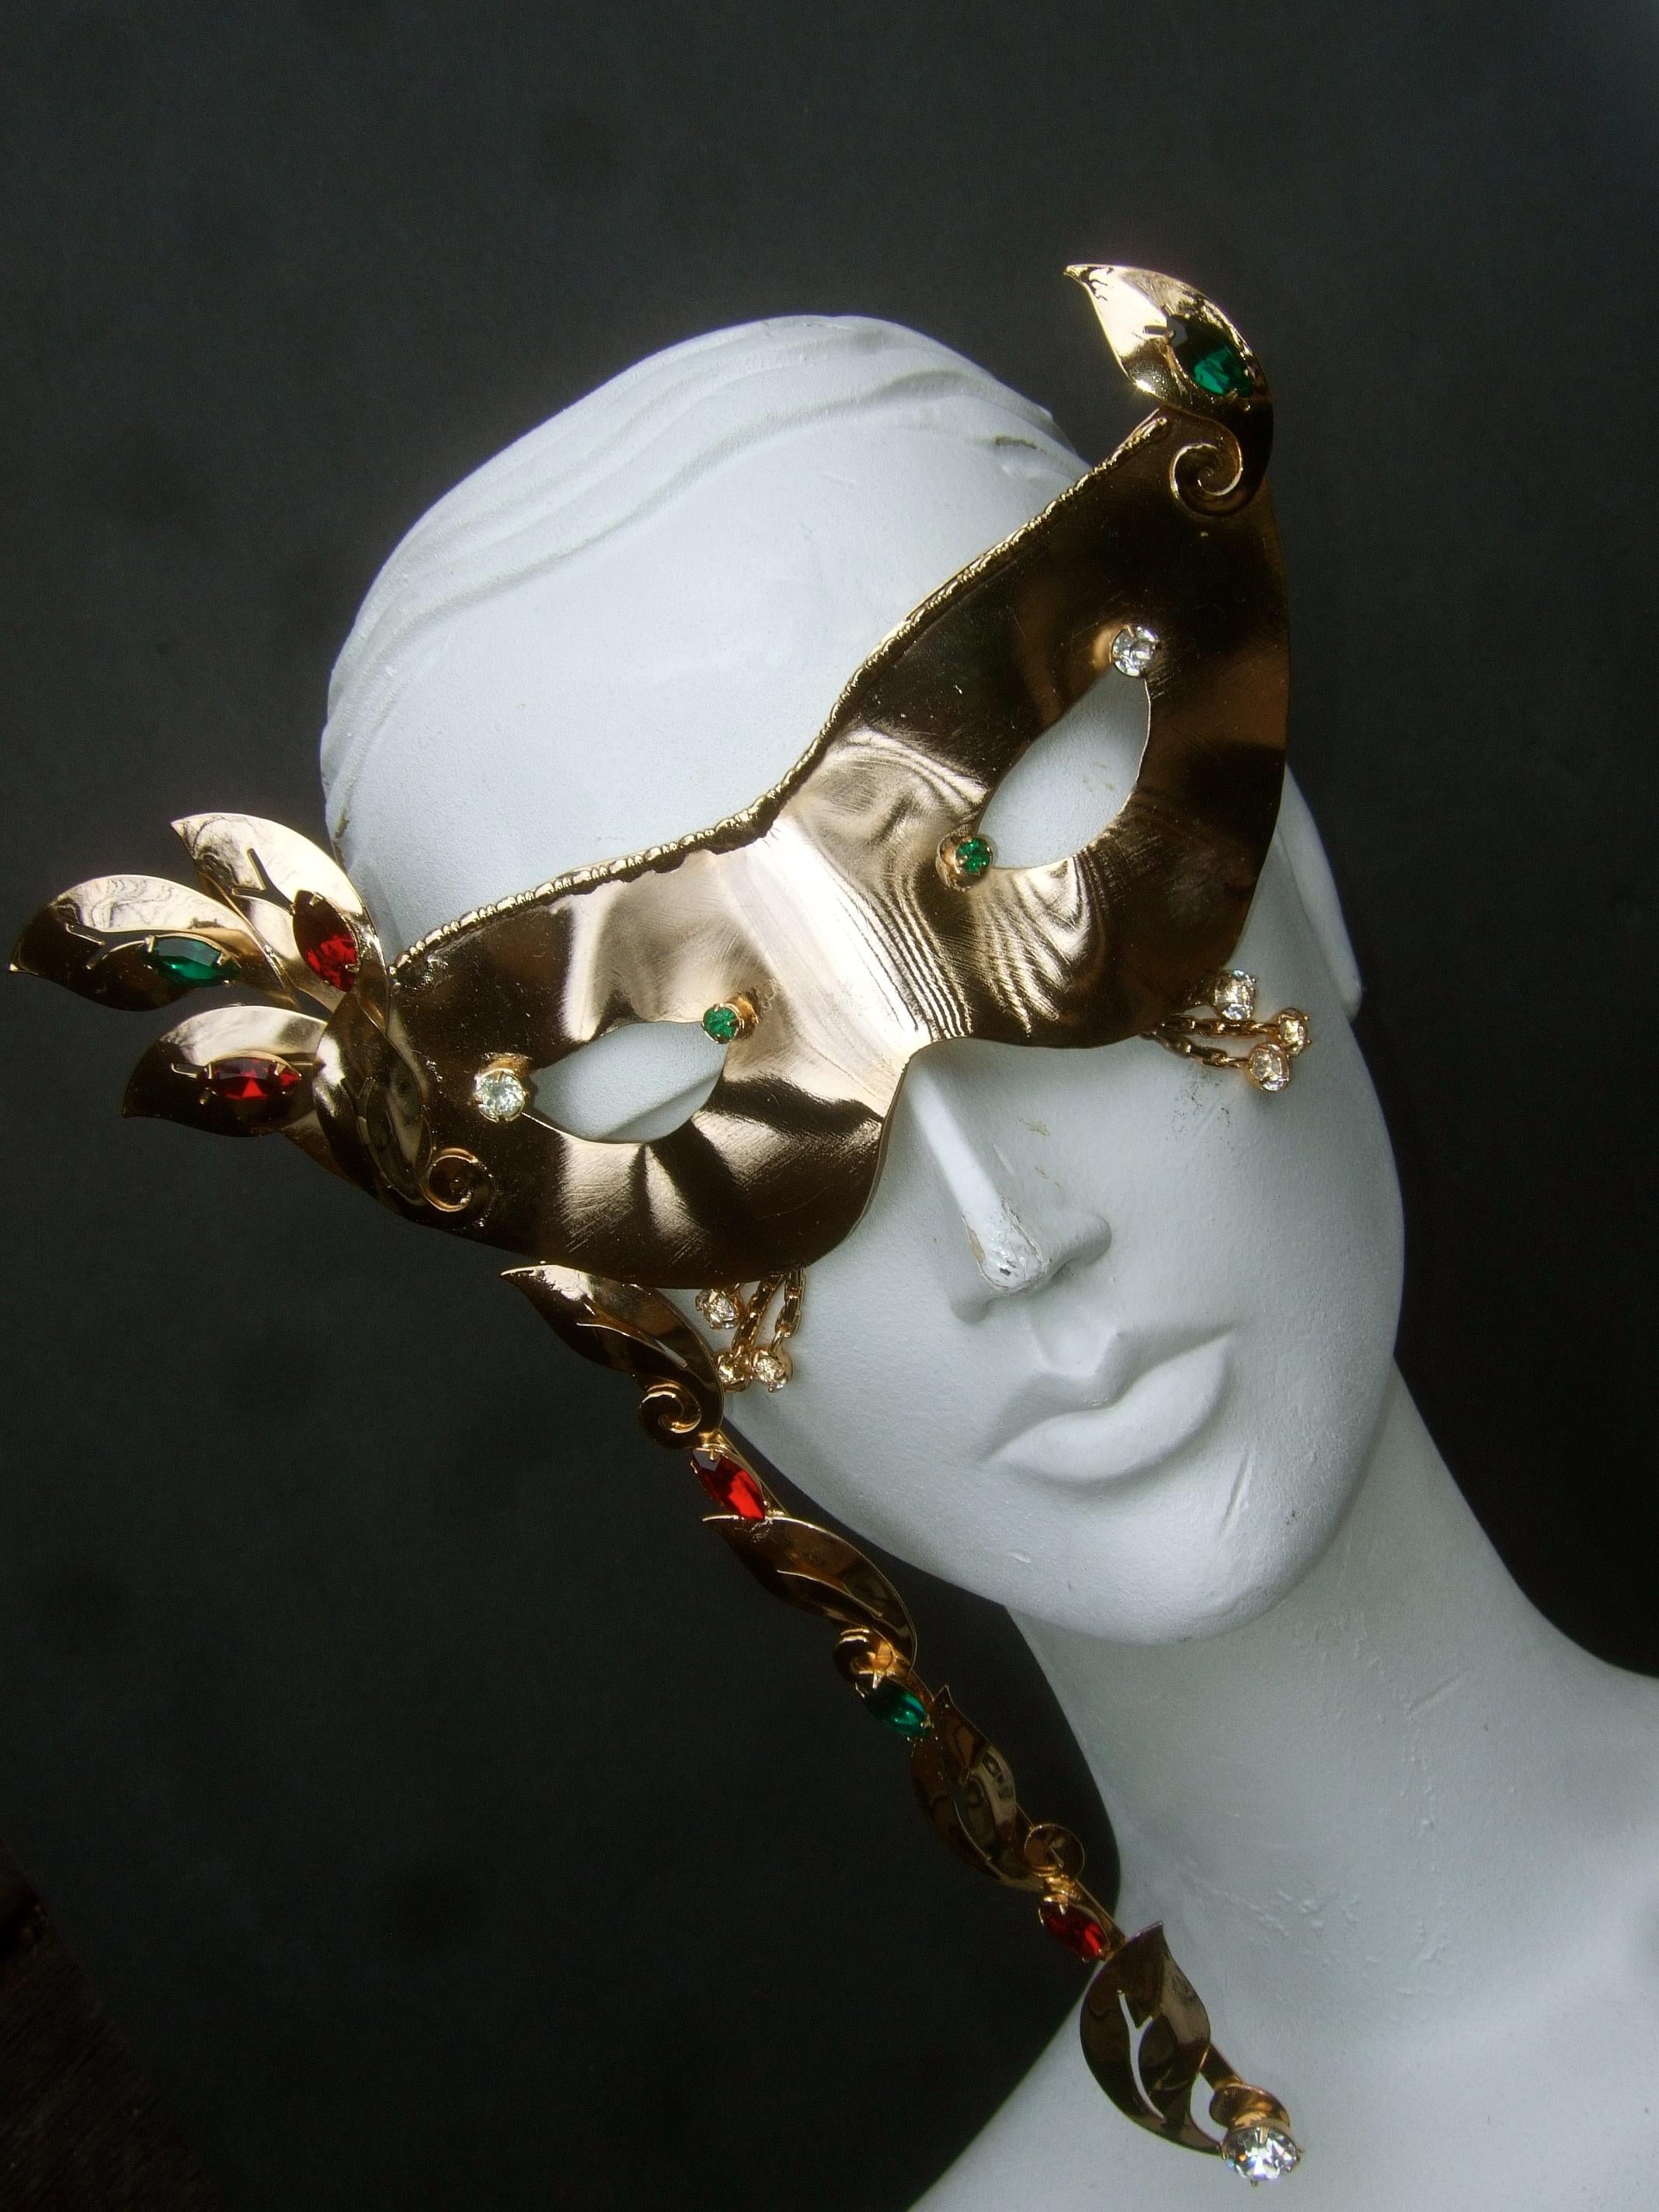 Rare Limited Edition Gilt Metal Mardi Gras Crystal Jeweled Mask by Joseff c 2013 For Sale 8